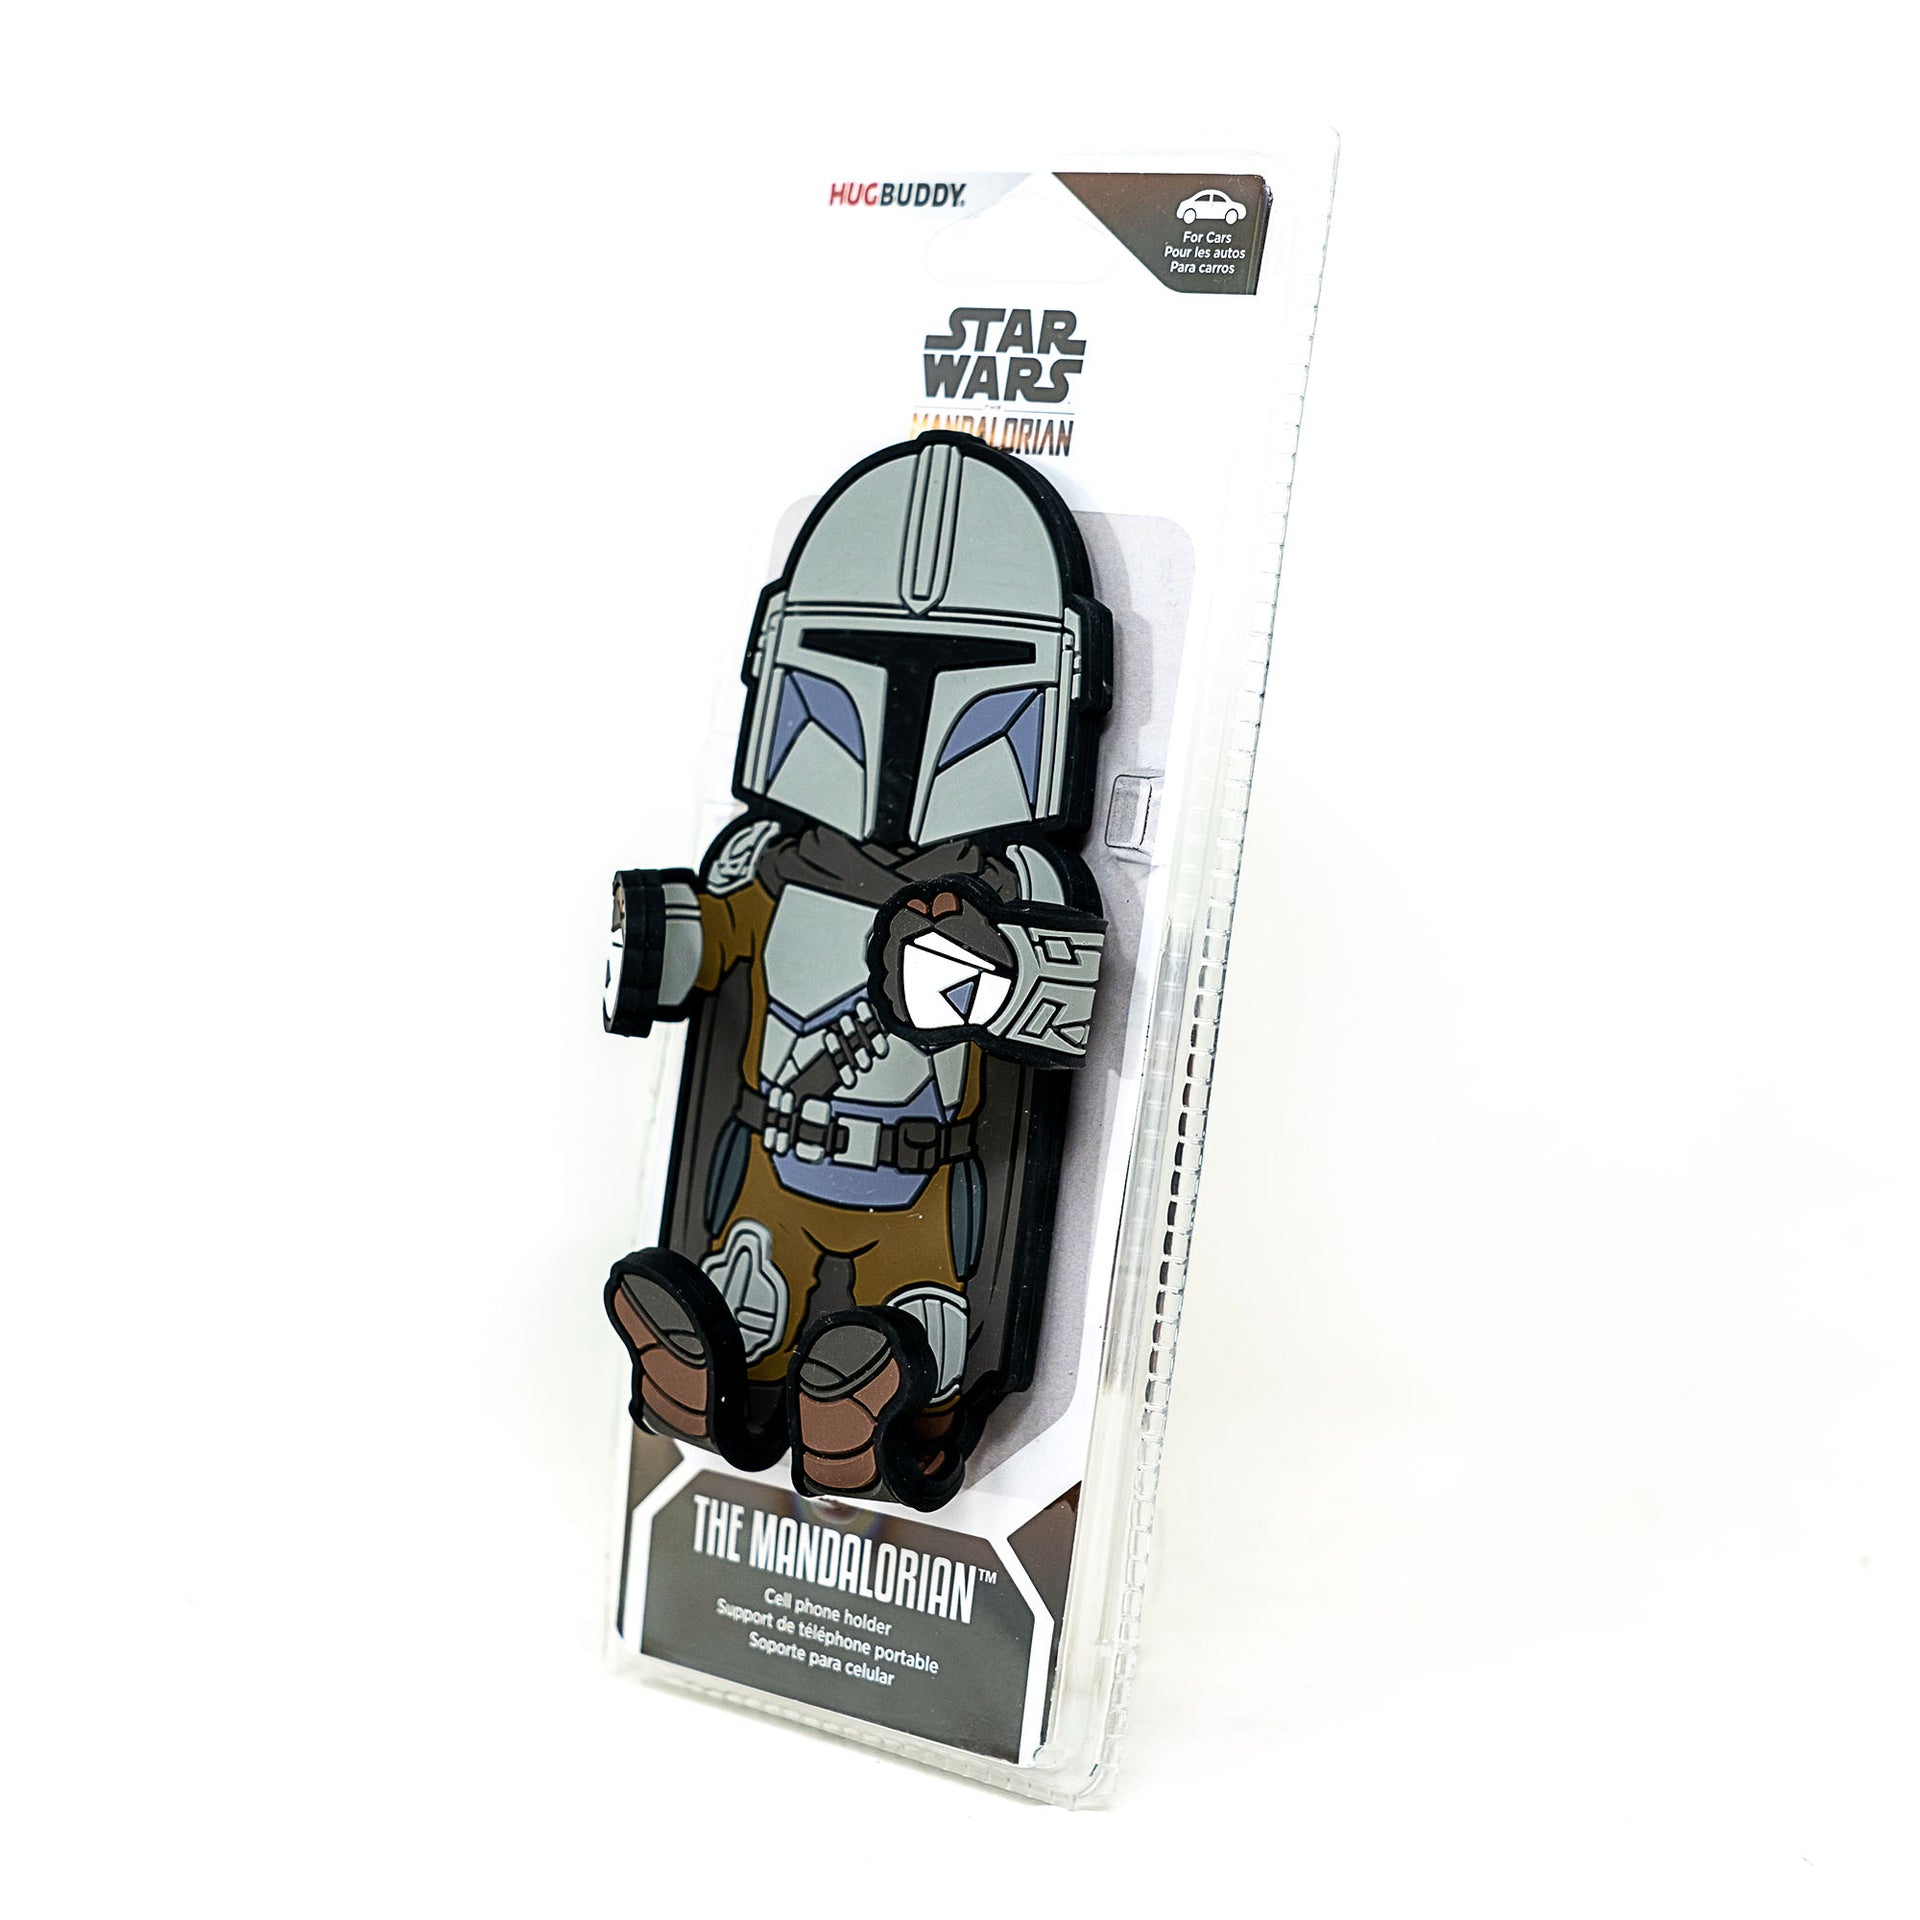 Image of Star Wars The Mandalorian Hug Buddy on a white background, packaging 45 degree side angle